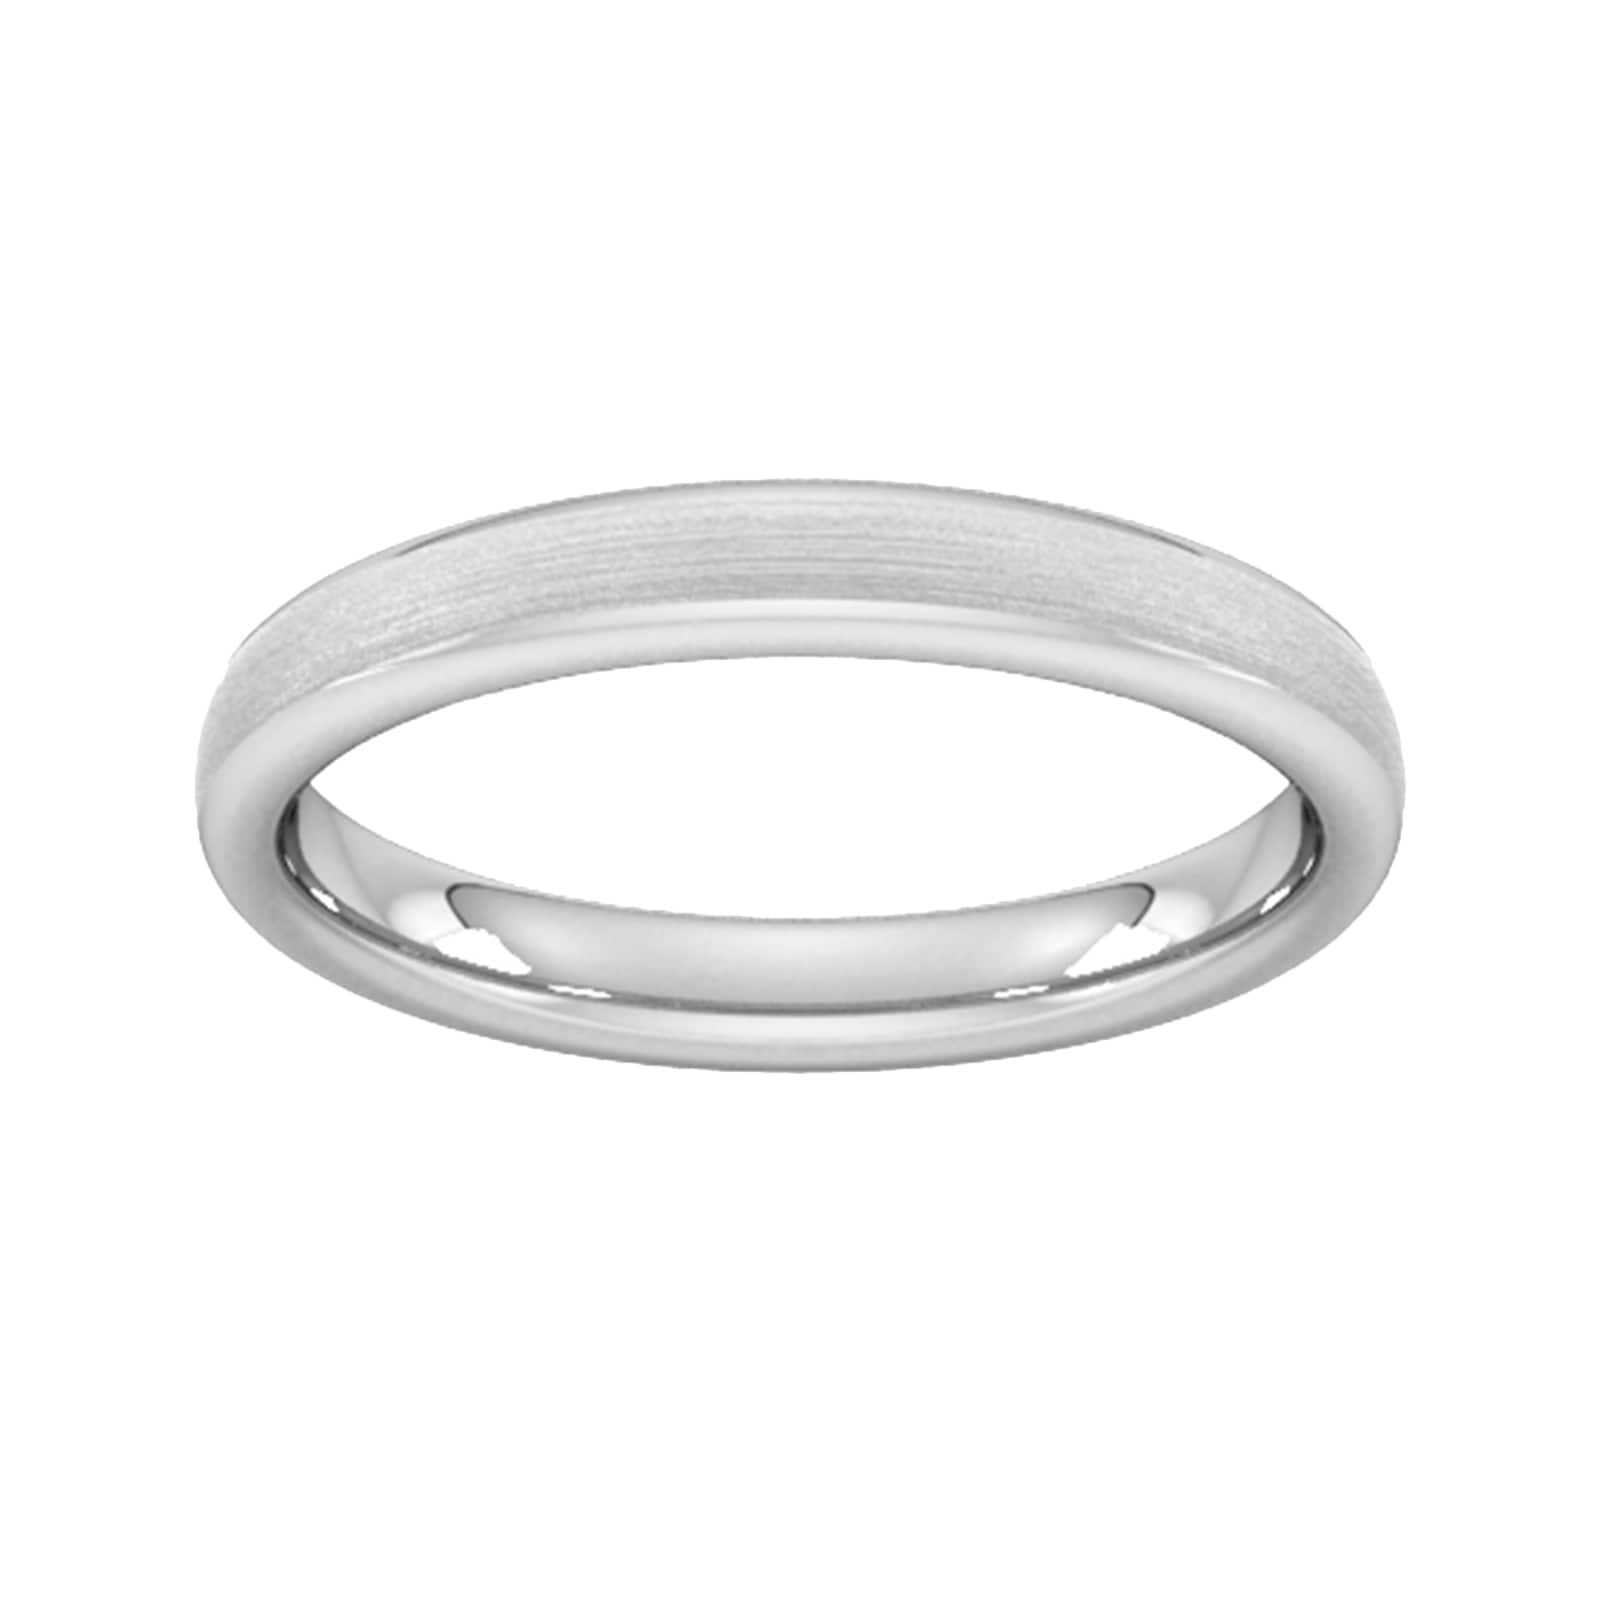 3mm Traditional Court Heavy Matt Finished Wedding Ring In 18 Carat White Gold - Ring Size S